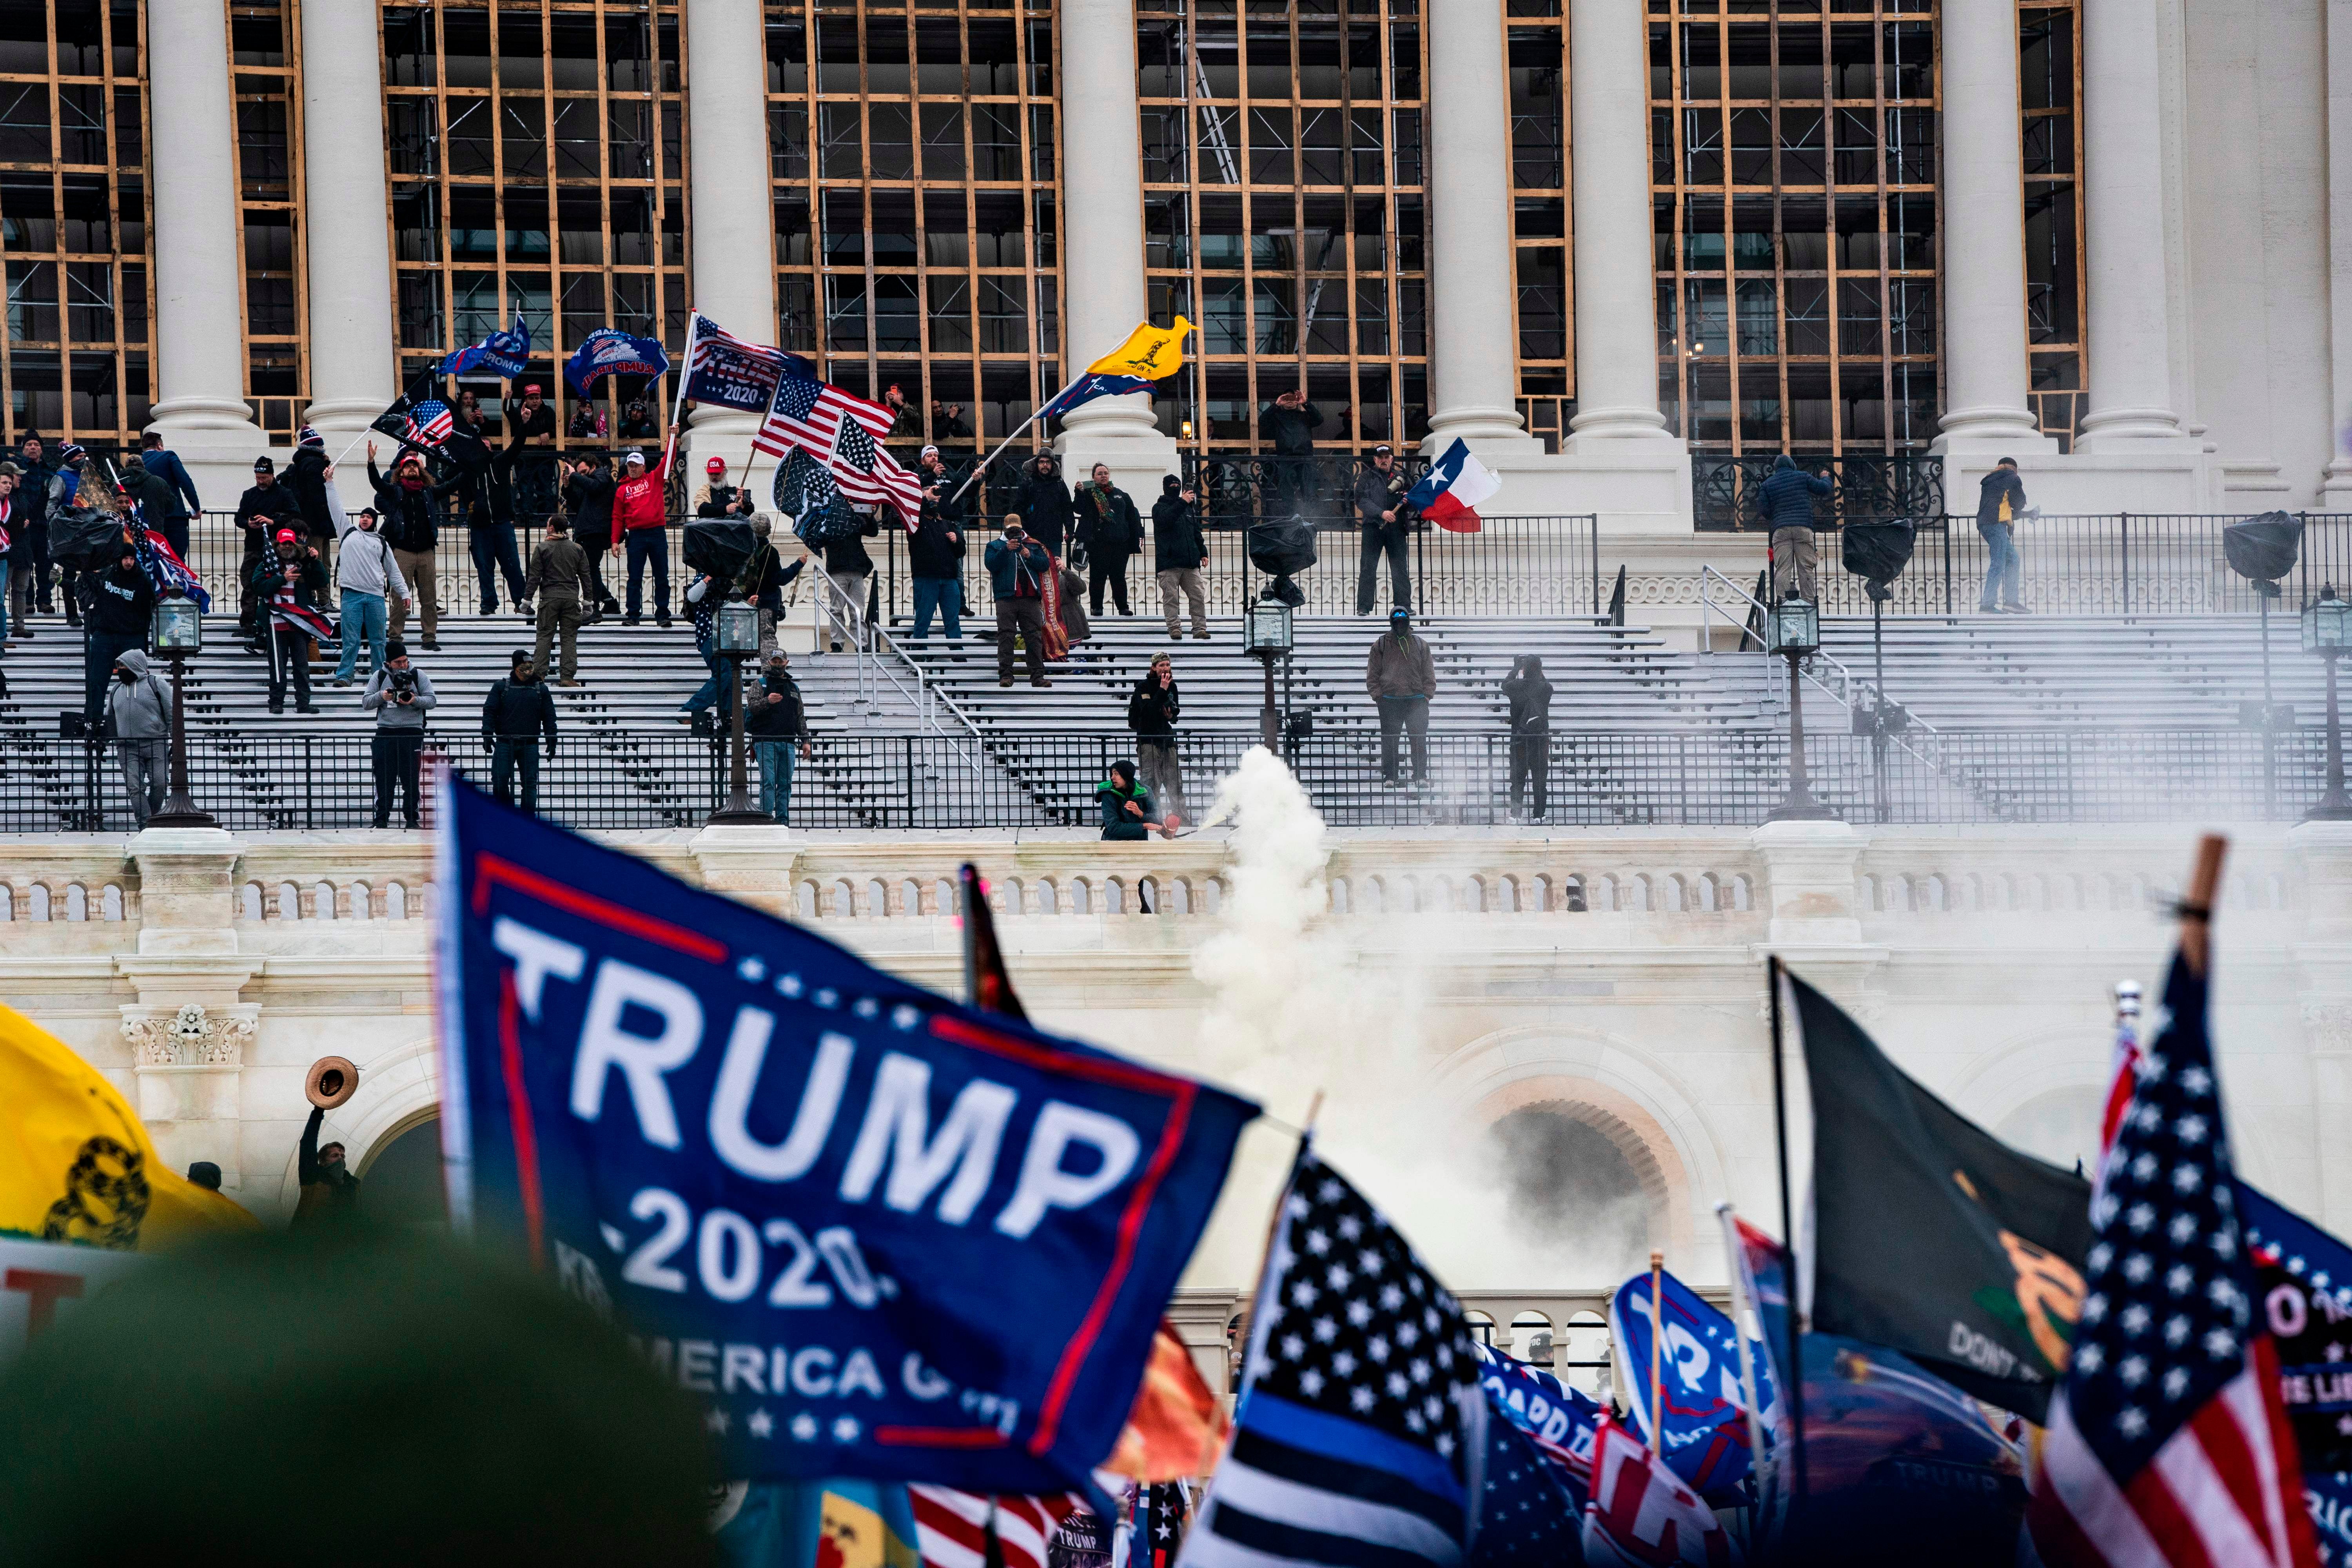 The riot at the U.S. Capitol on Jan. 6, 2021.